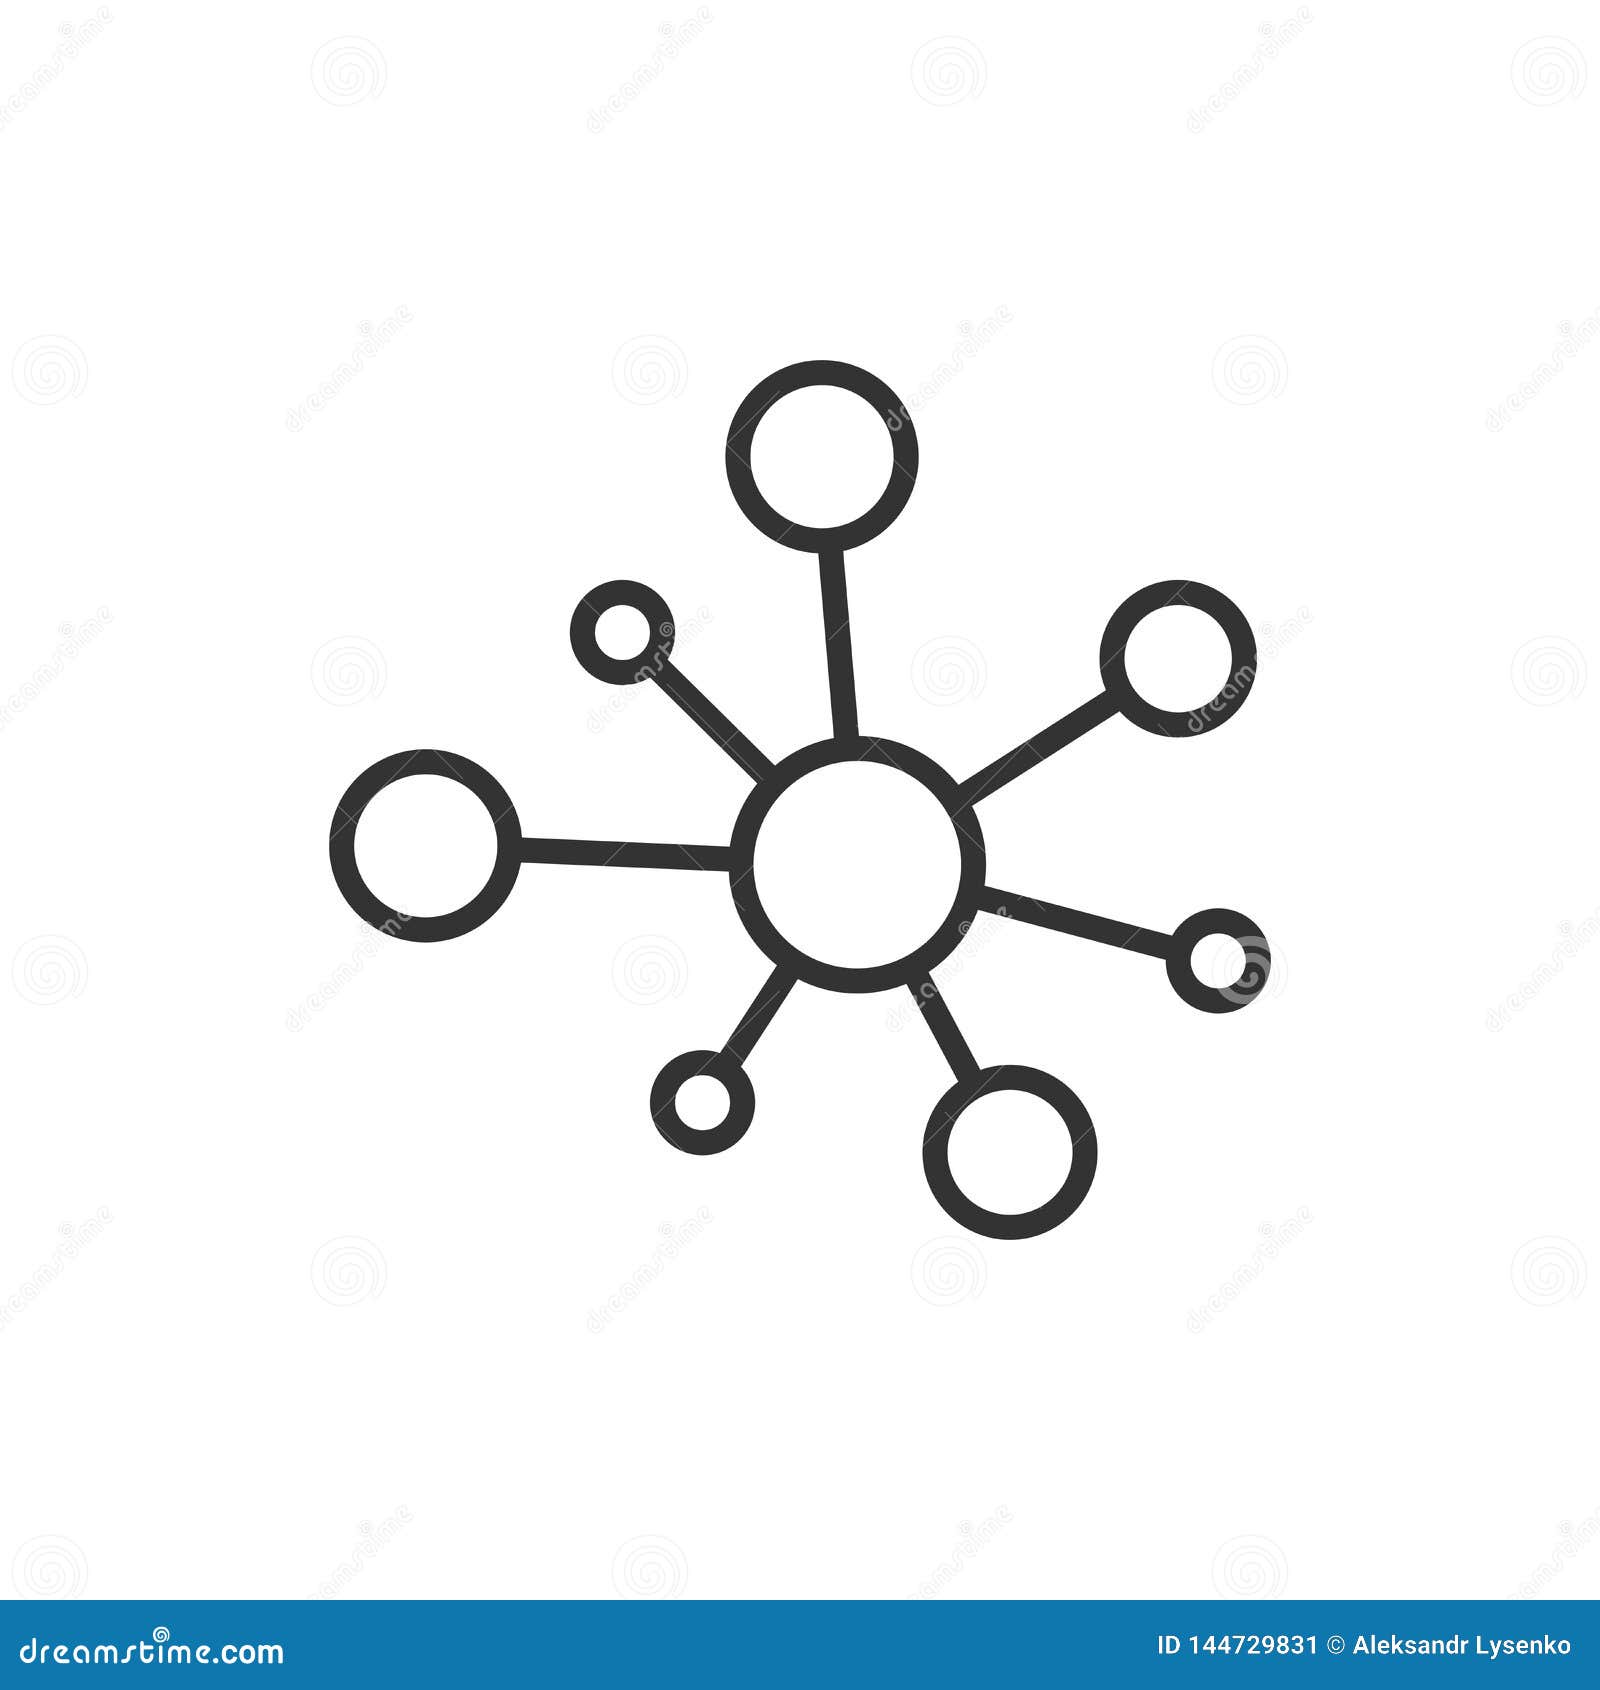 hub network connection sign icon in flat style. dna molecule   on white  background. atom business